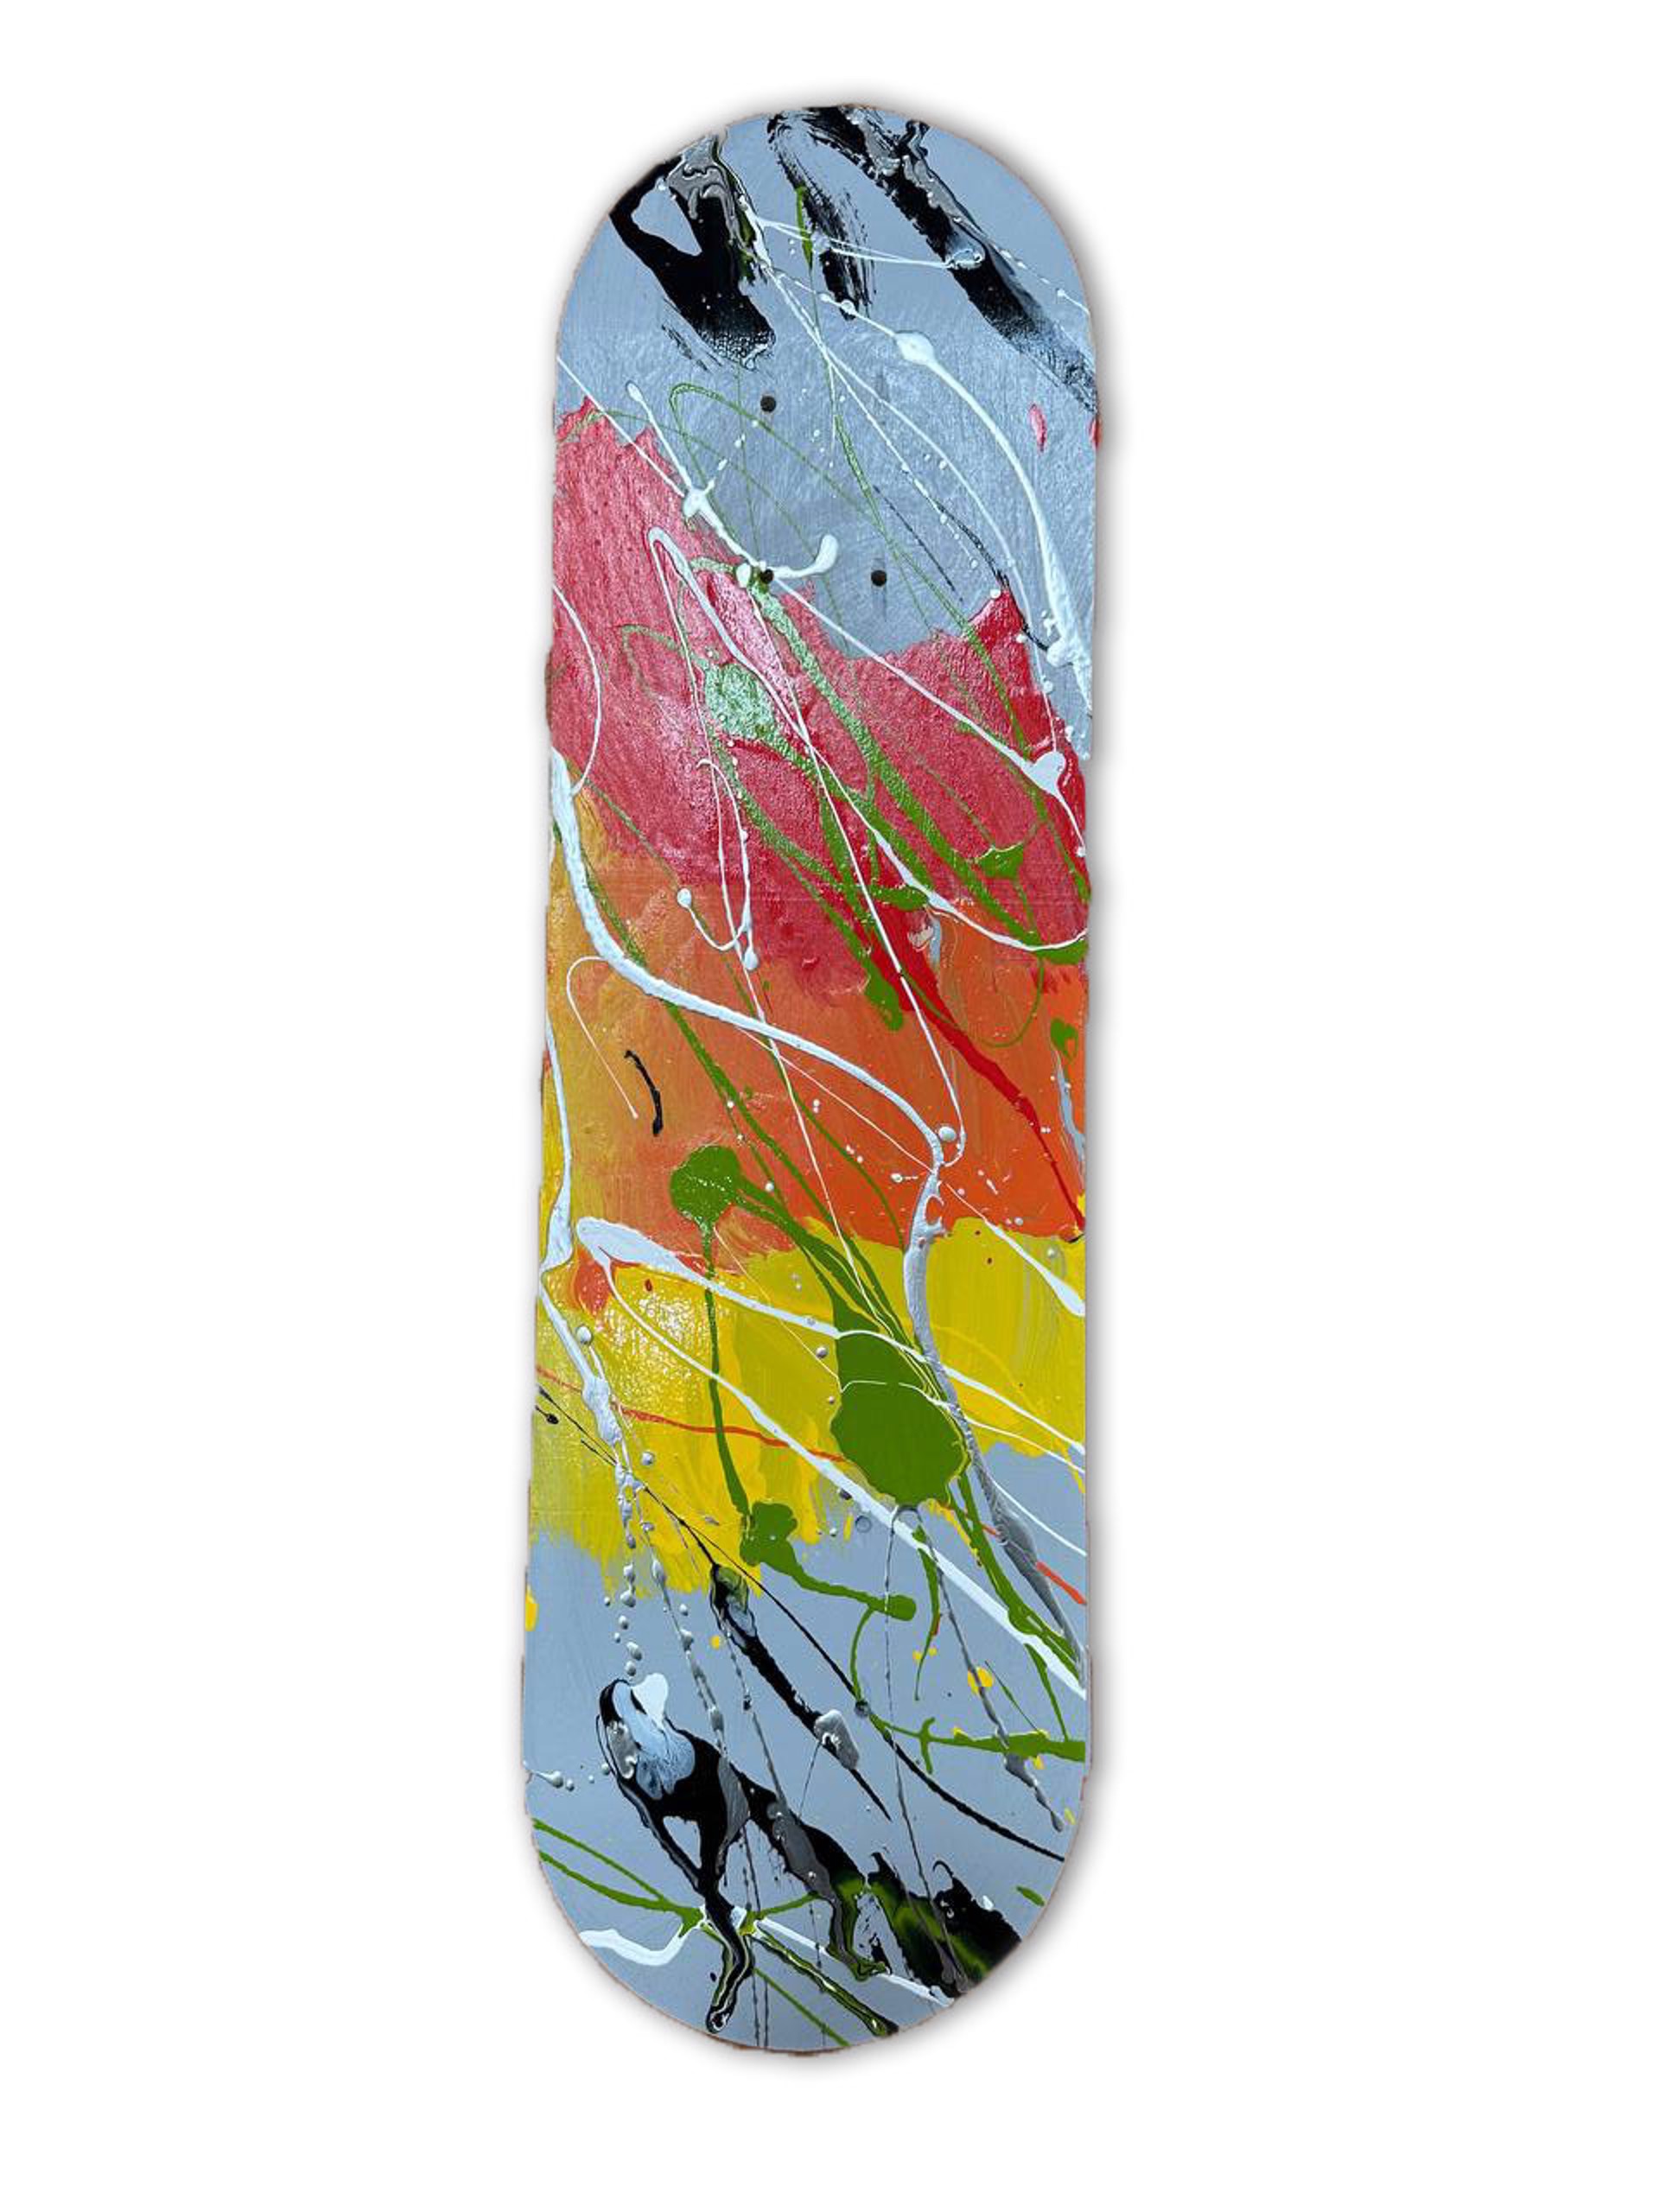 "Abstract Skateboard III (Red Orange Yellow)" by Abstract Skateboards Wall Sculptures by Elena Bulatova